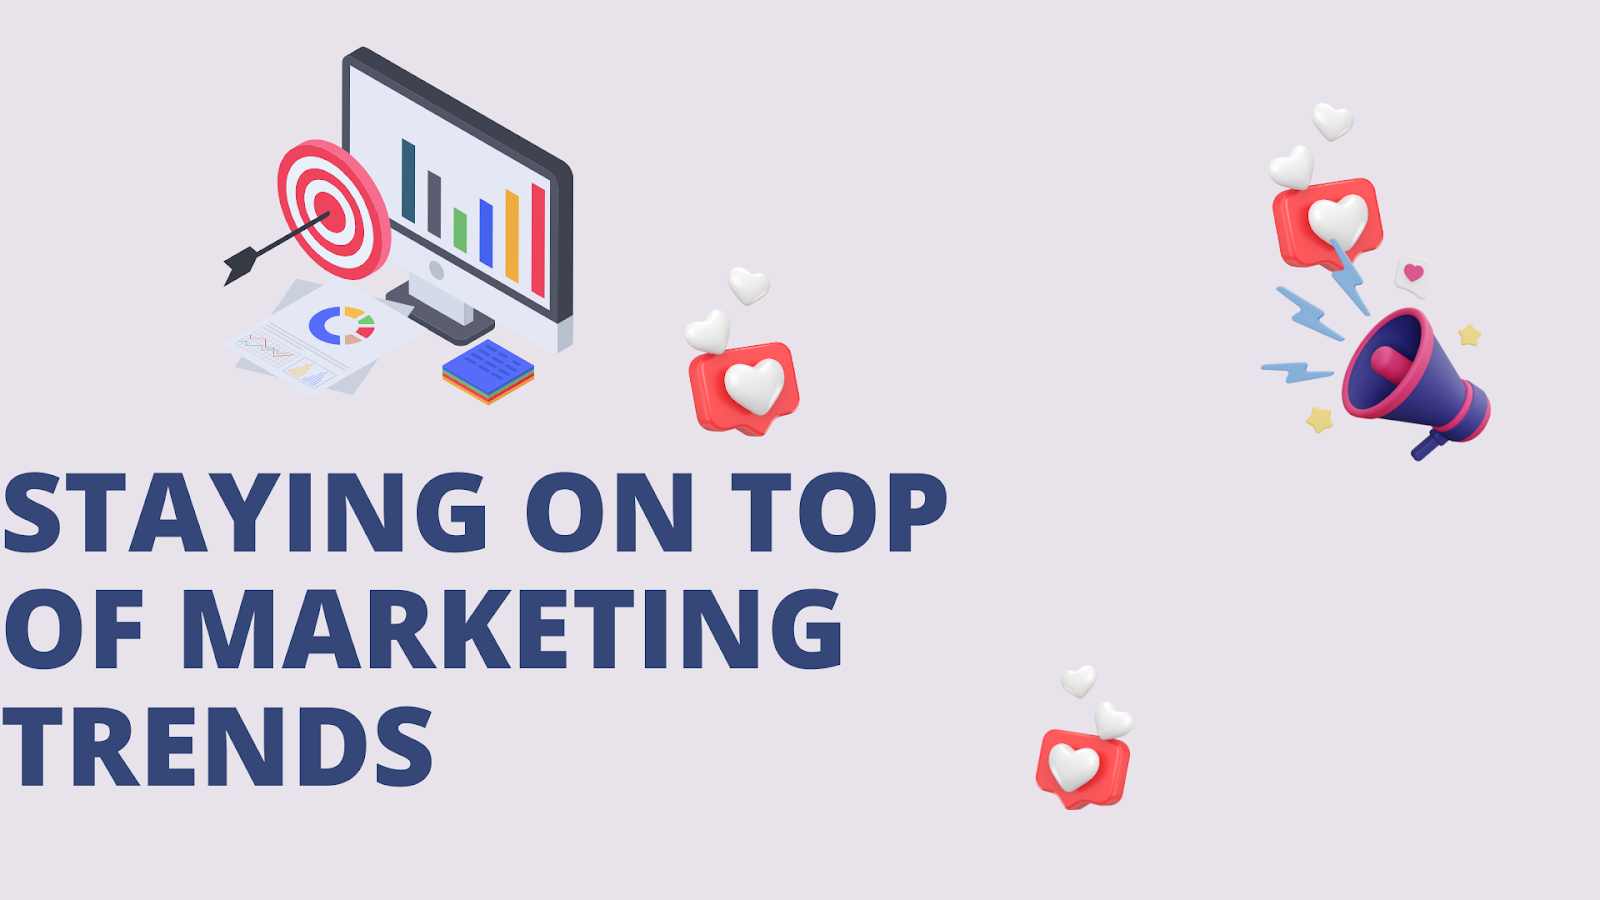 Staying on Top Of Marketing Trends